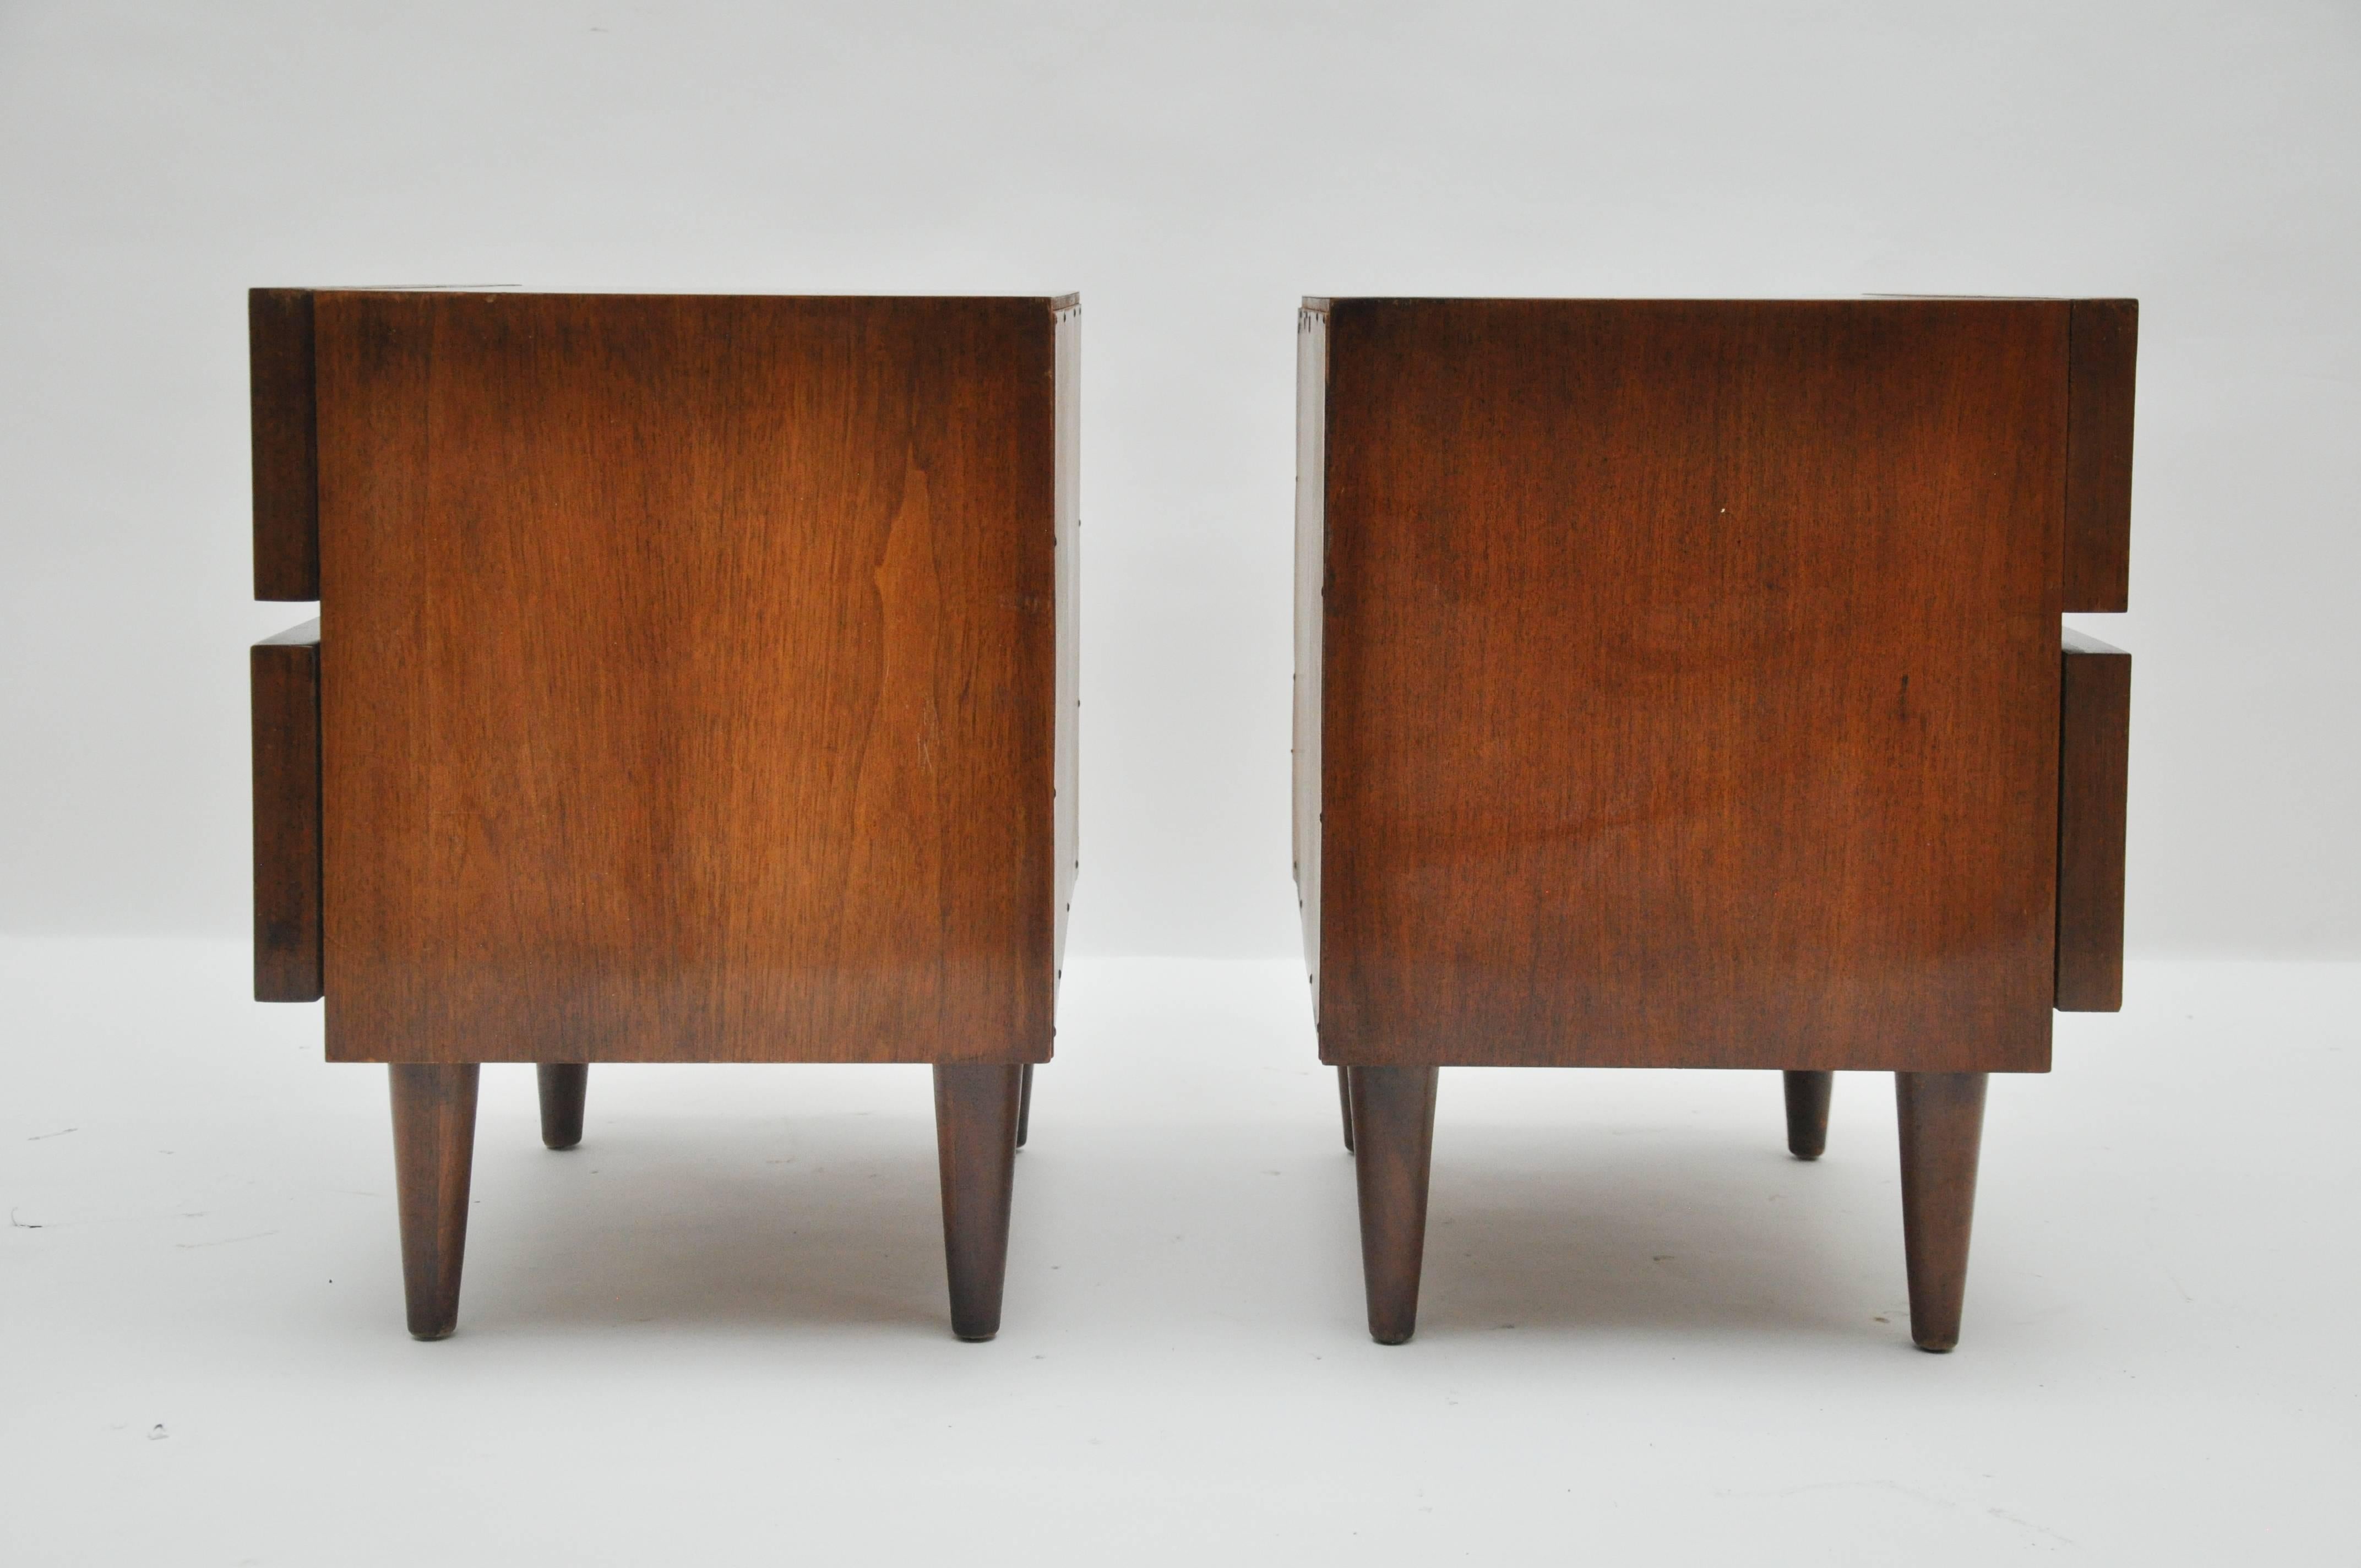 Pair of Mid-Century Modern nightstands by American of Martinsville. They would also make great side tables. See listing of matching dresser and five-drawer chest.